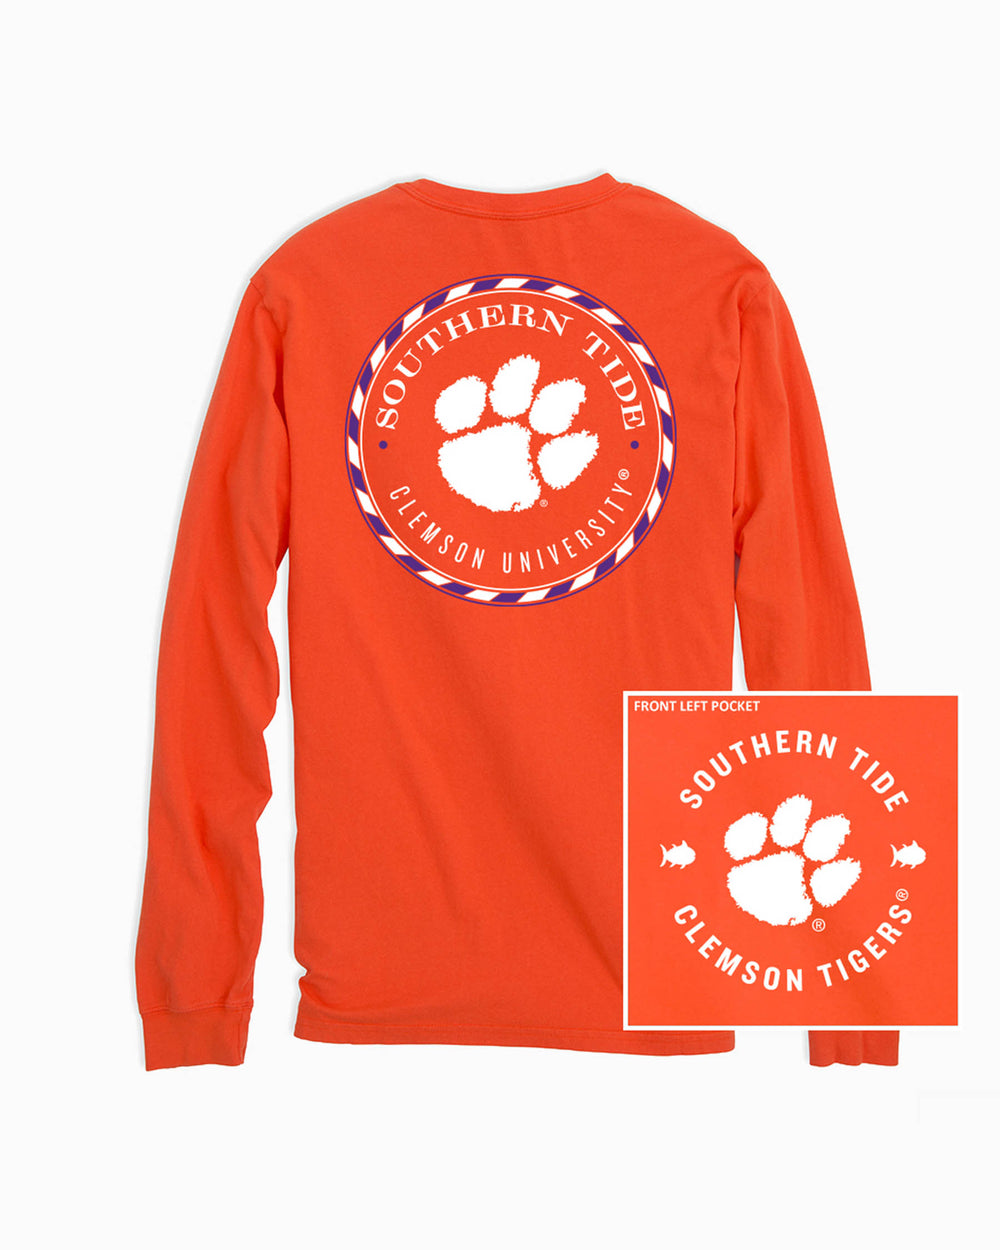 The front of the Clemson Tigers Long Sleeve Medallion Logo T-Shirt by Southern Tide - Endzone Orange